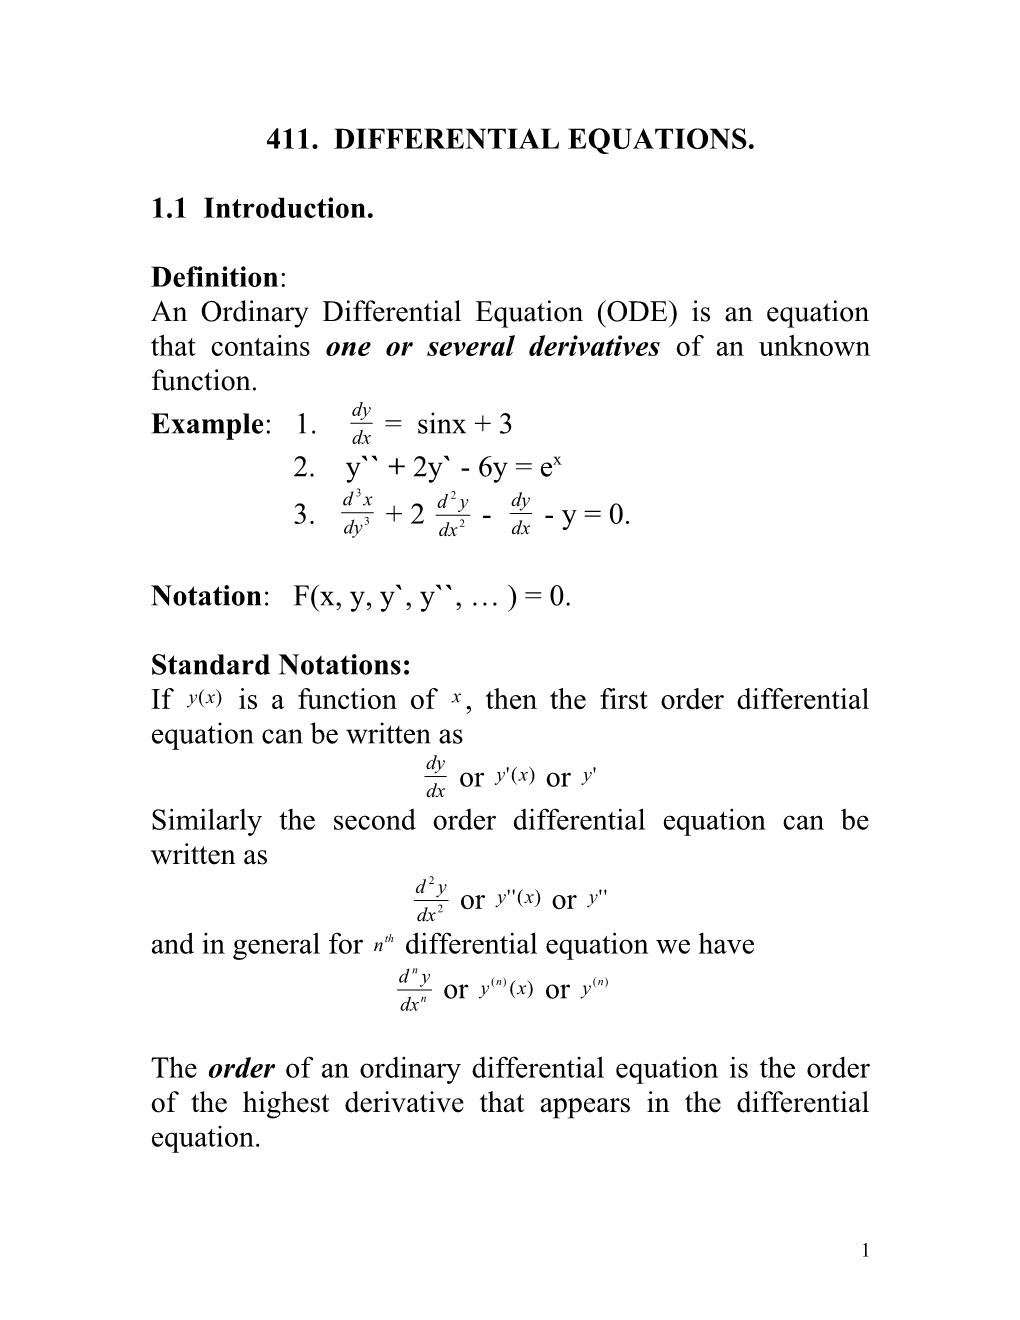 411. Differential Equations